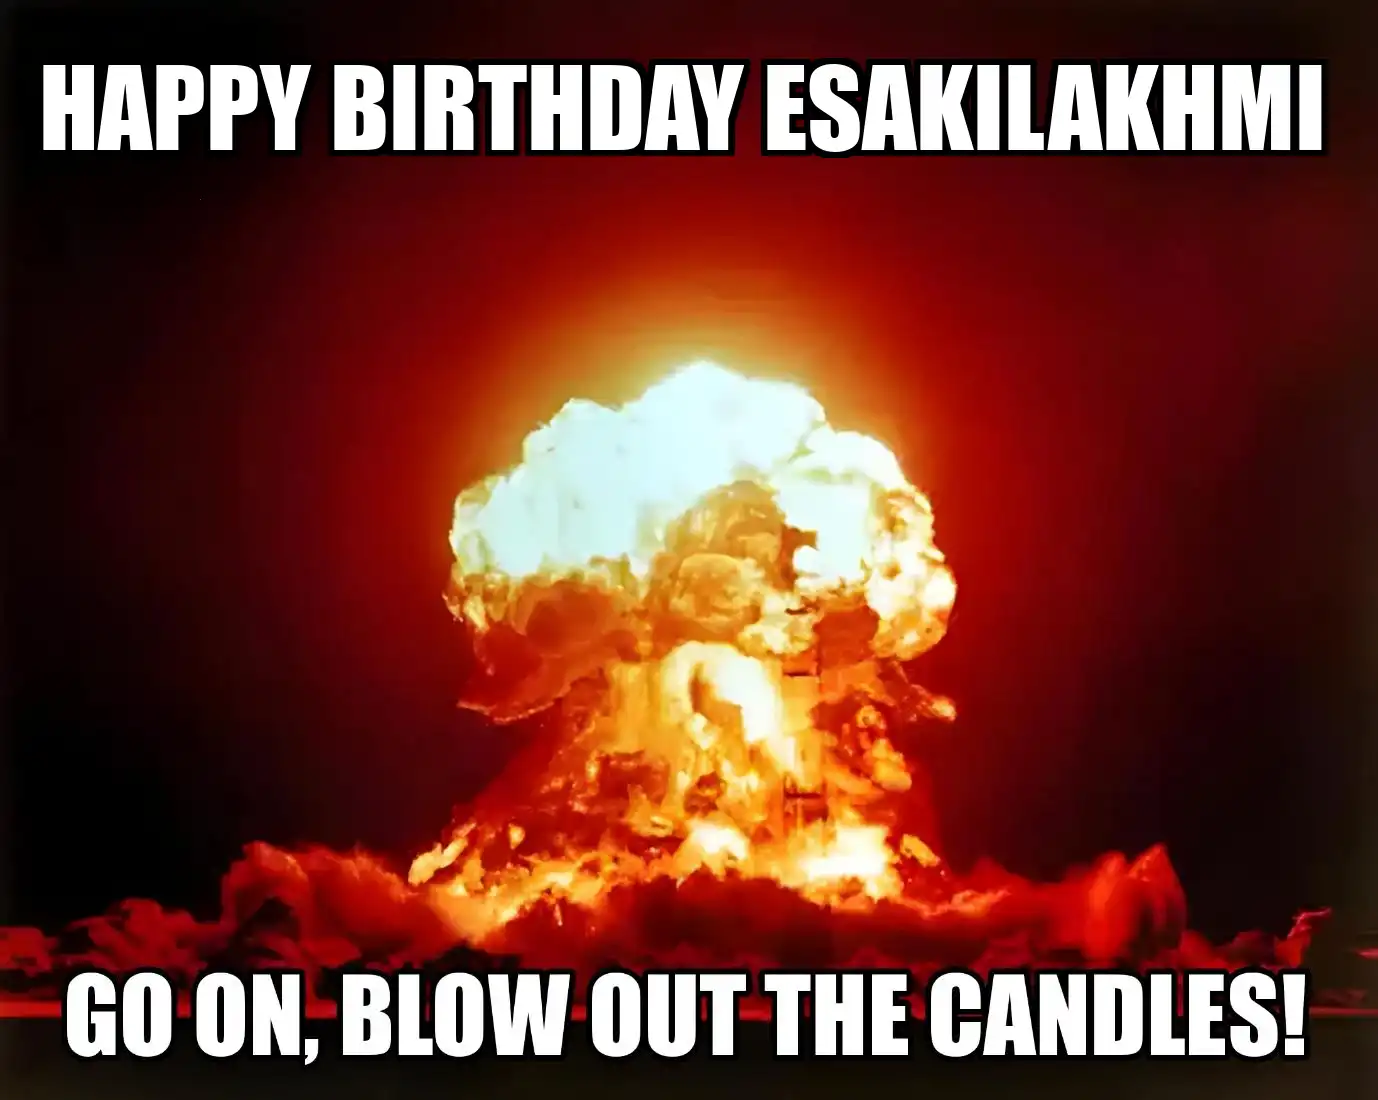 Happy Birthday Esakilakhmi Go On Blow Out The Candles Meme